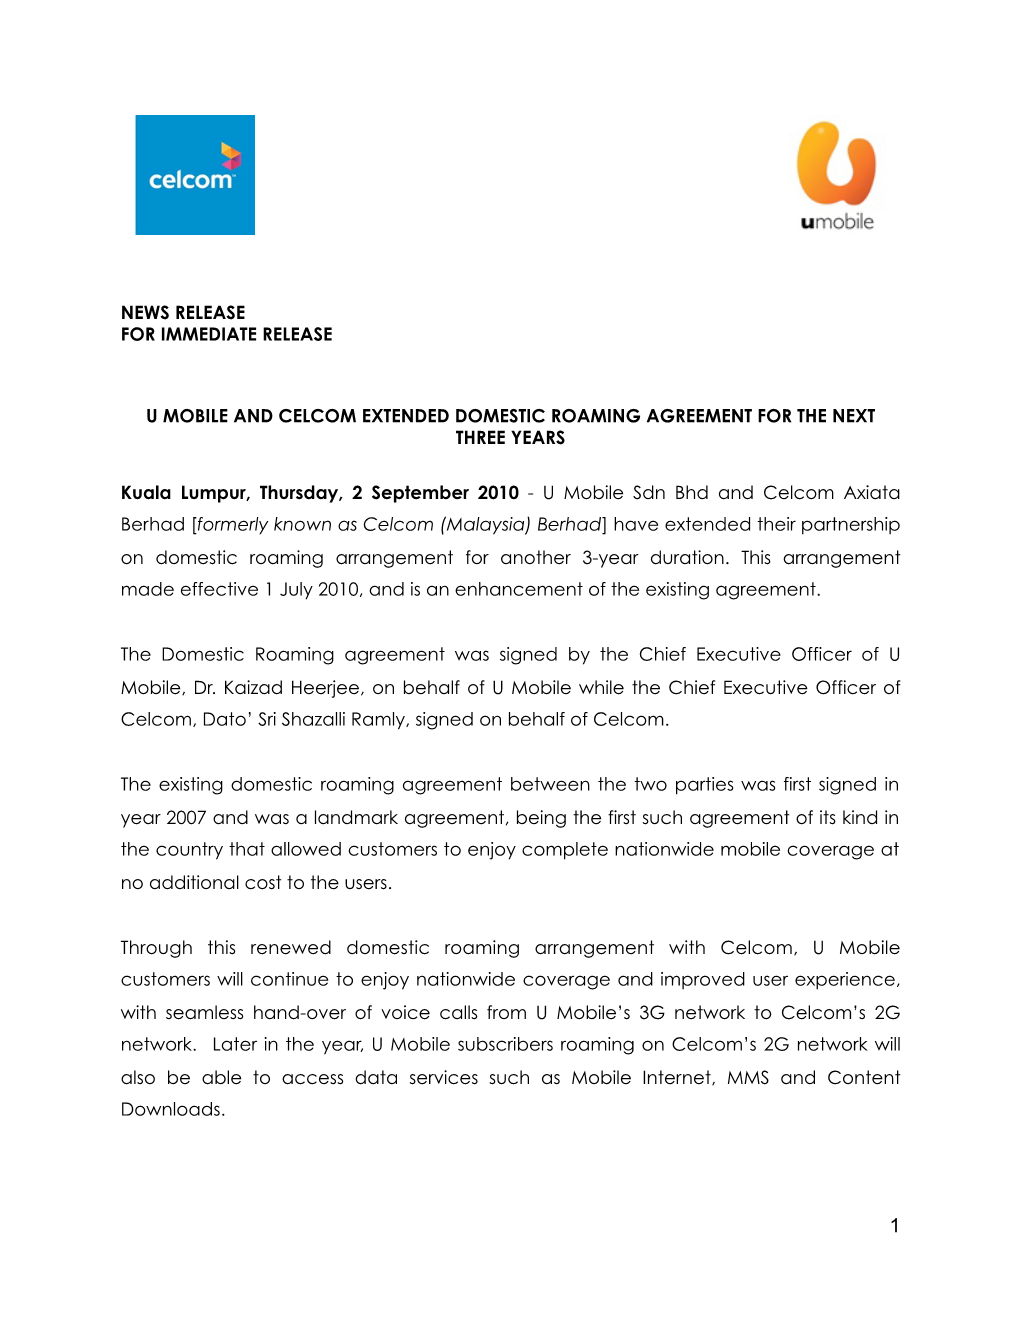 U Mobile and Celcom Extended Domestic Roaming Agreement for the Next Three Years